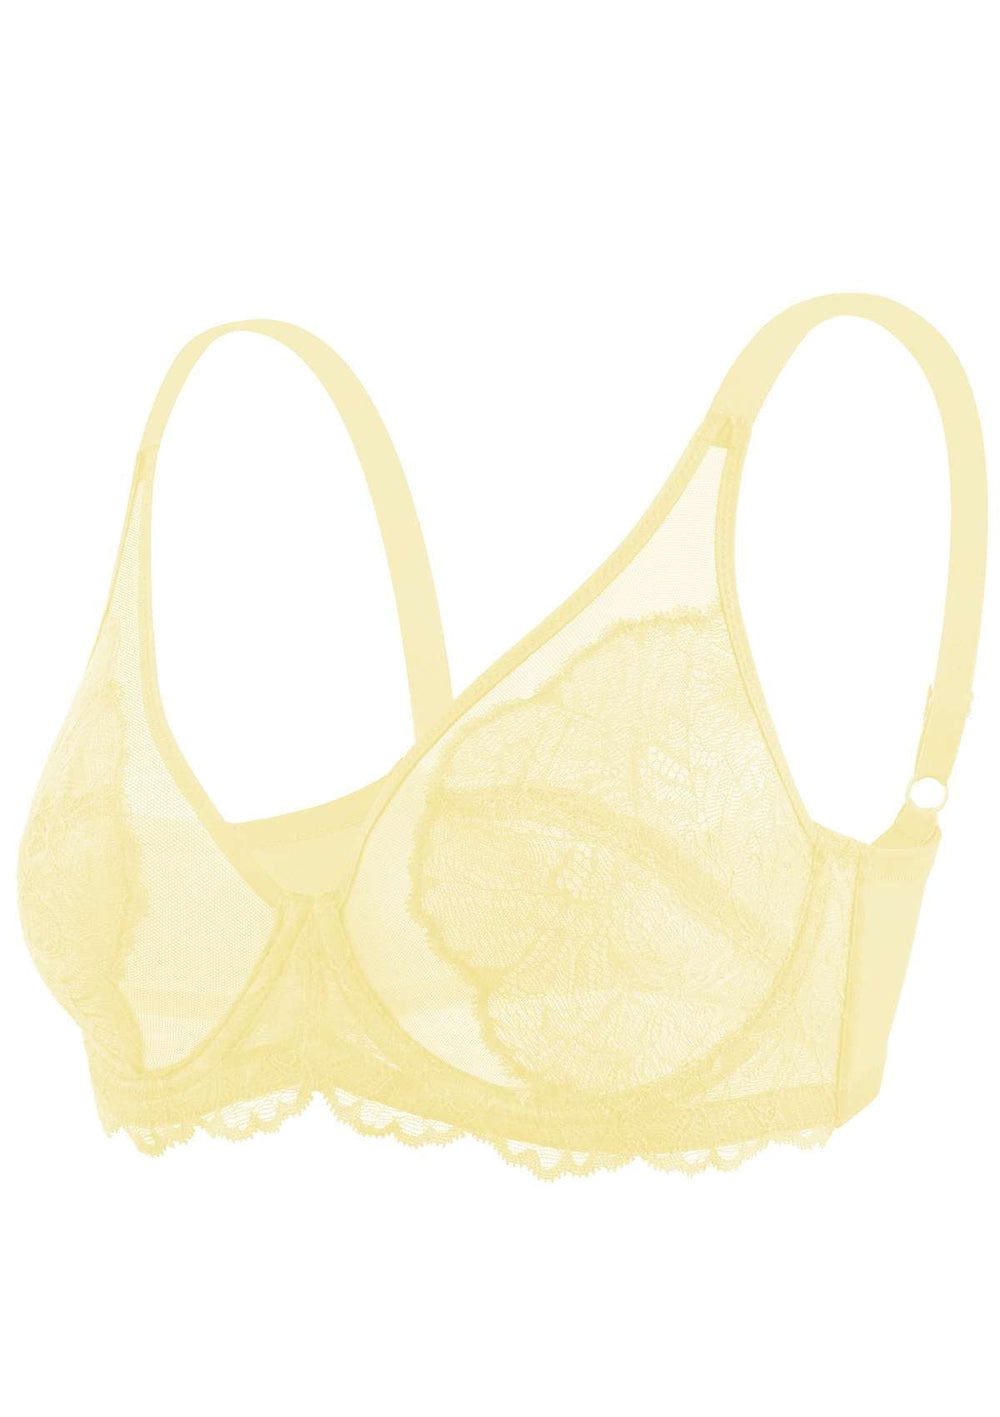 Buy A-GG Yellow Recycled Lace Full Cup Non Padded Bra - 32G